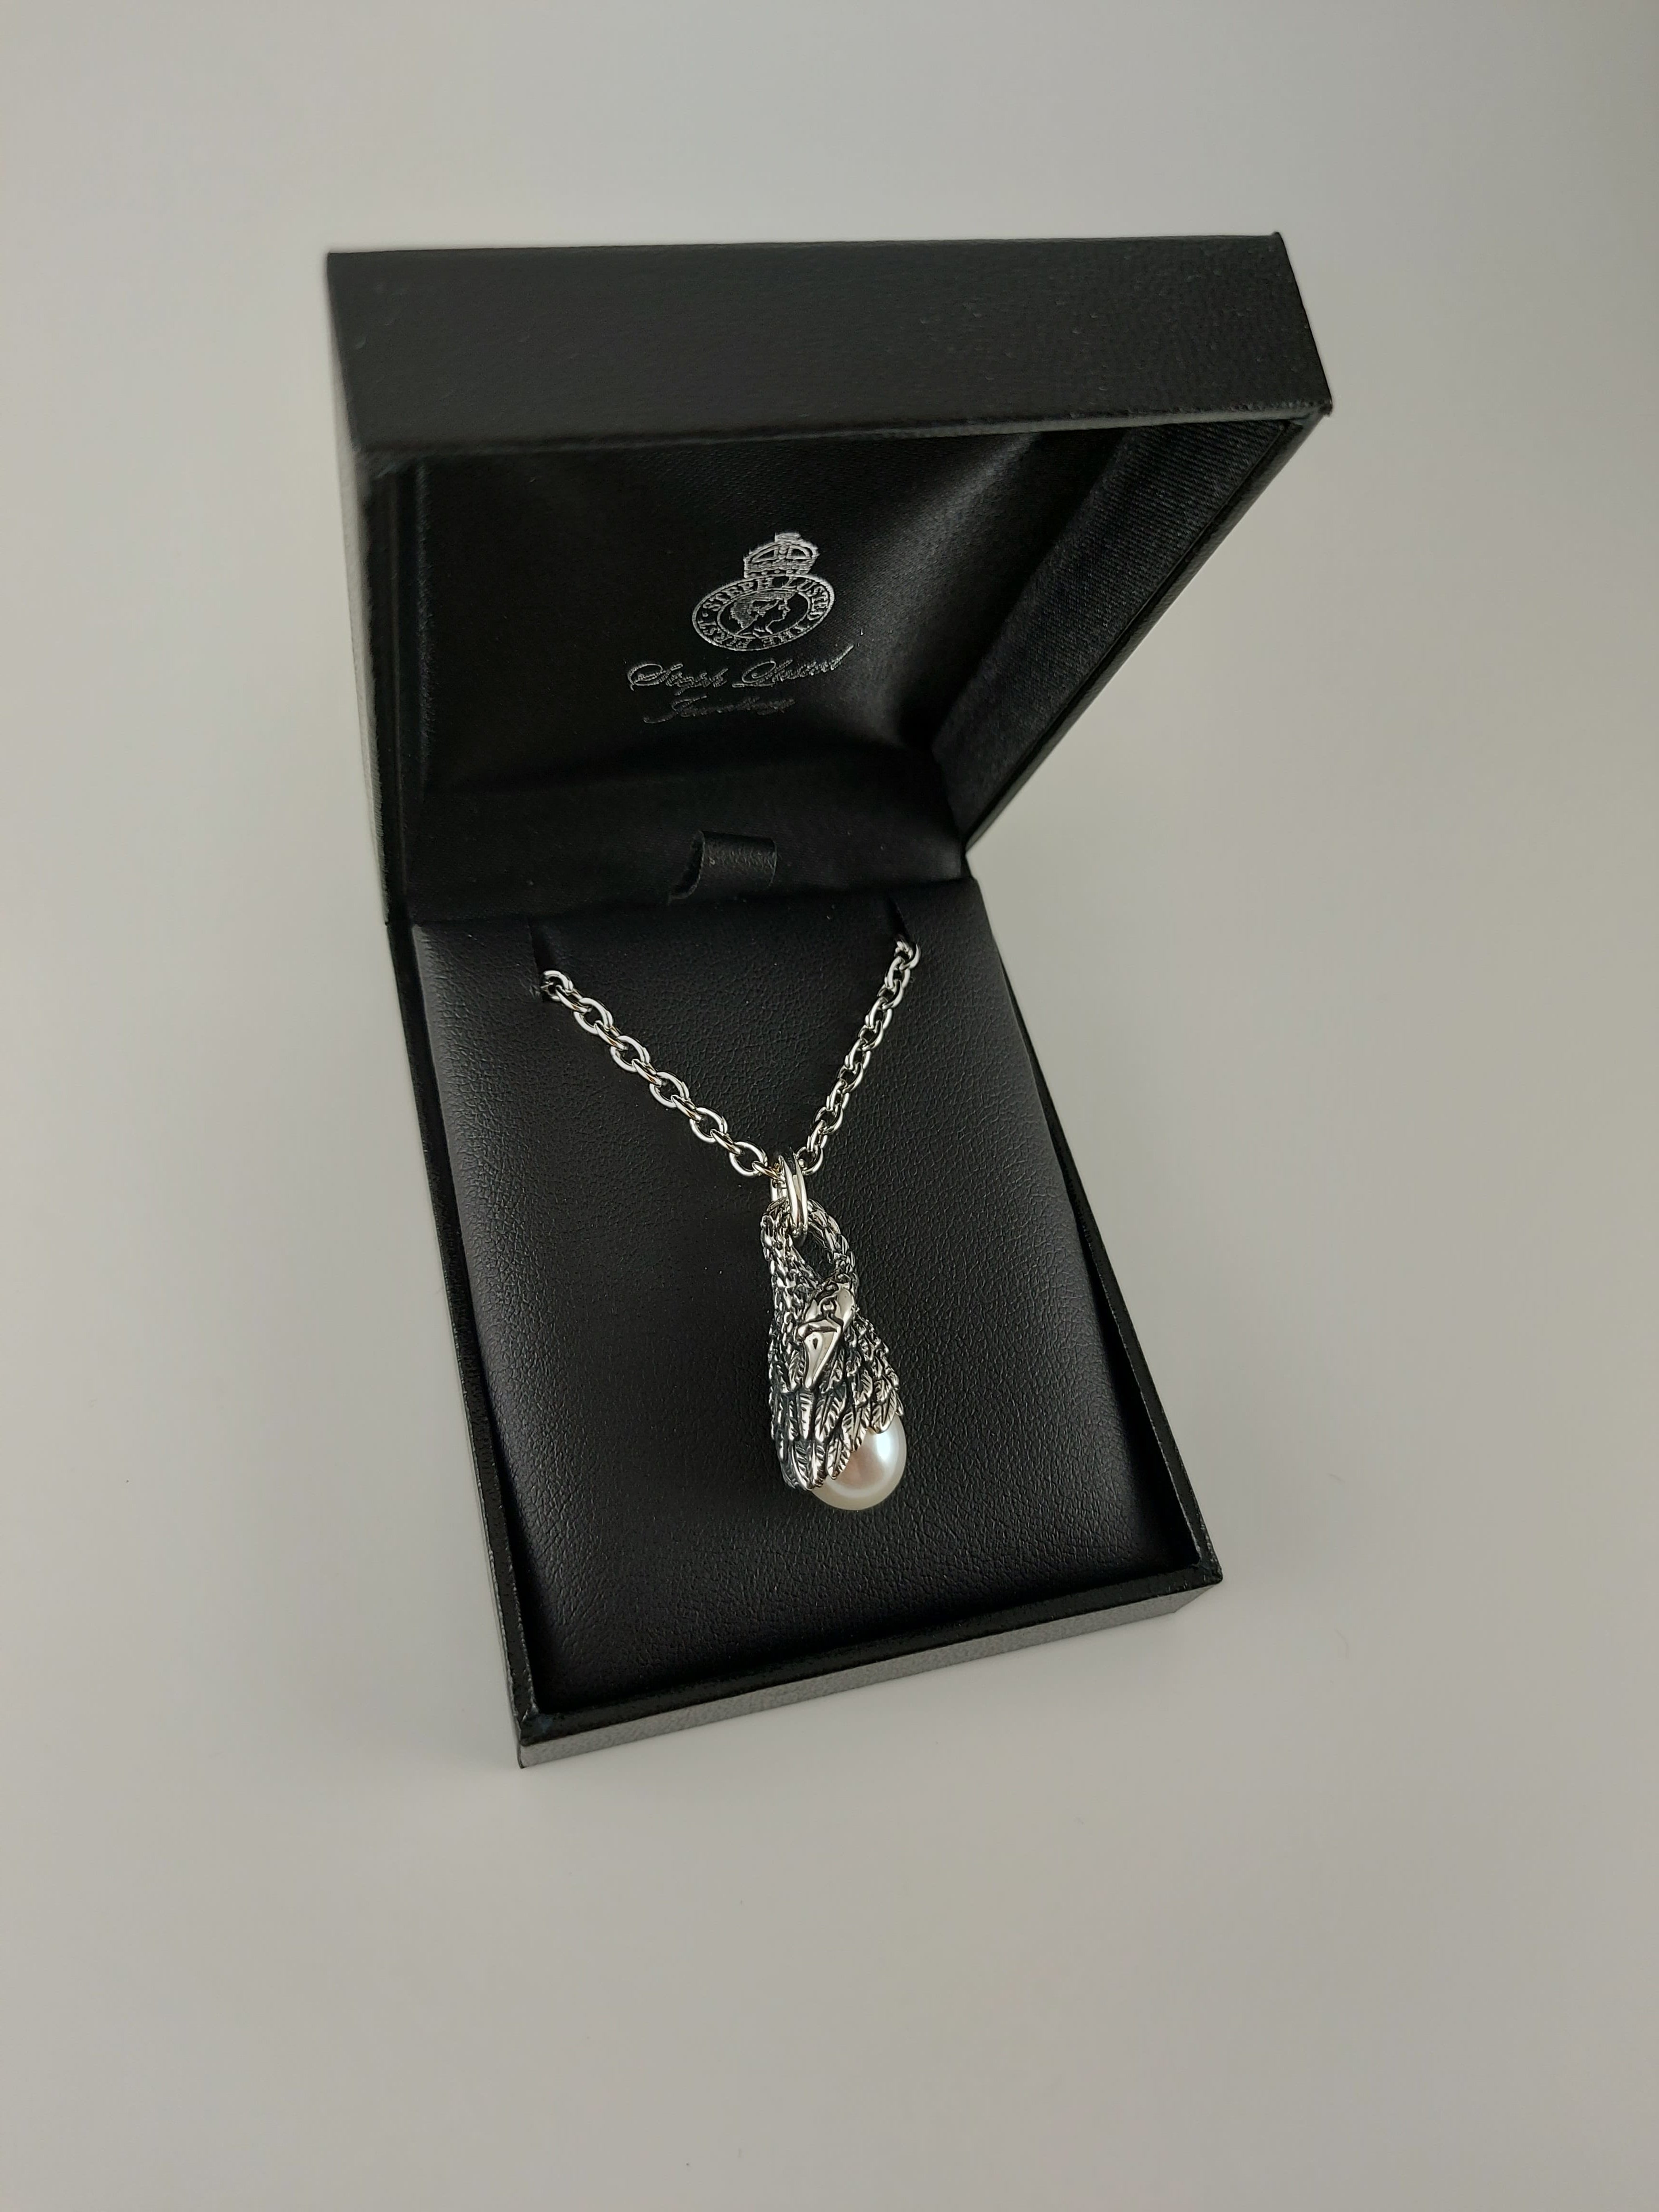 Swan & Pearl Necklace